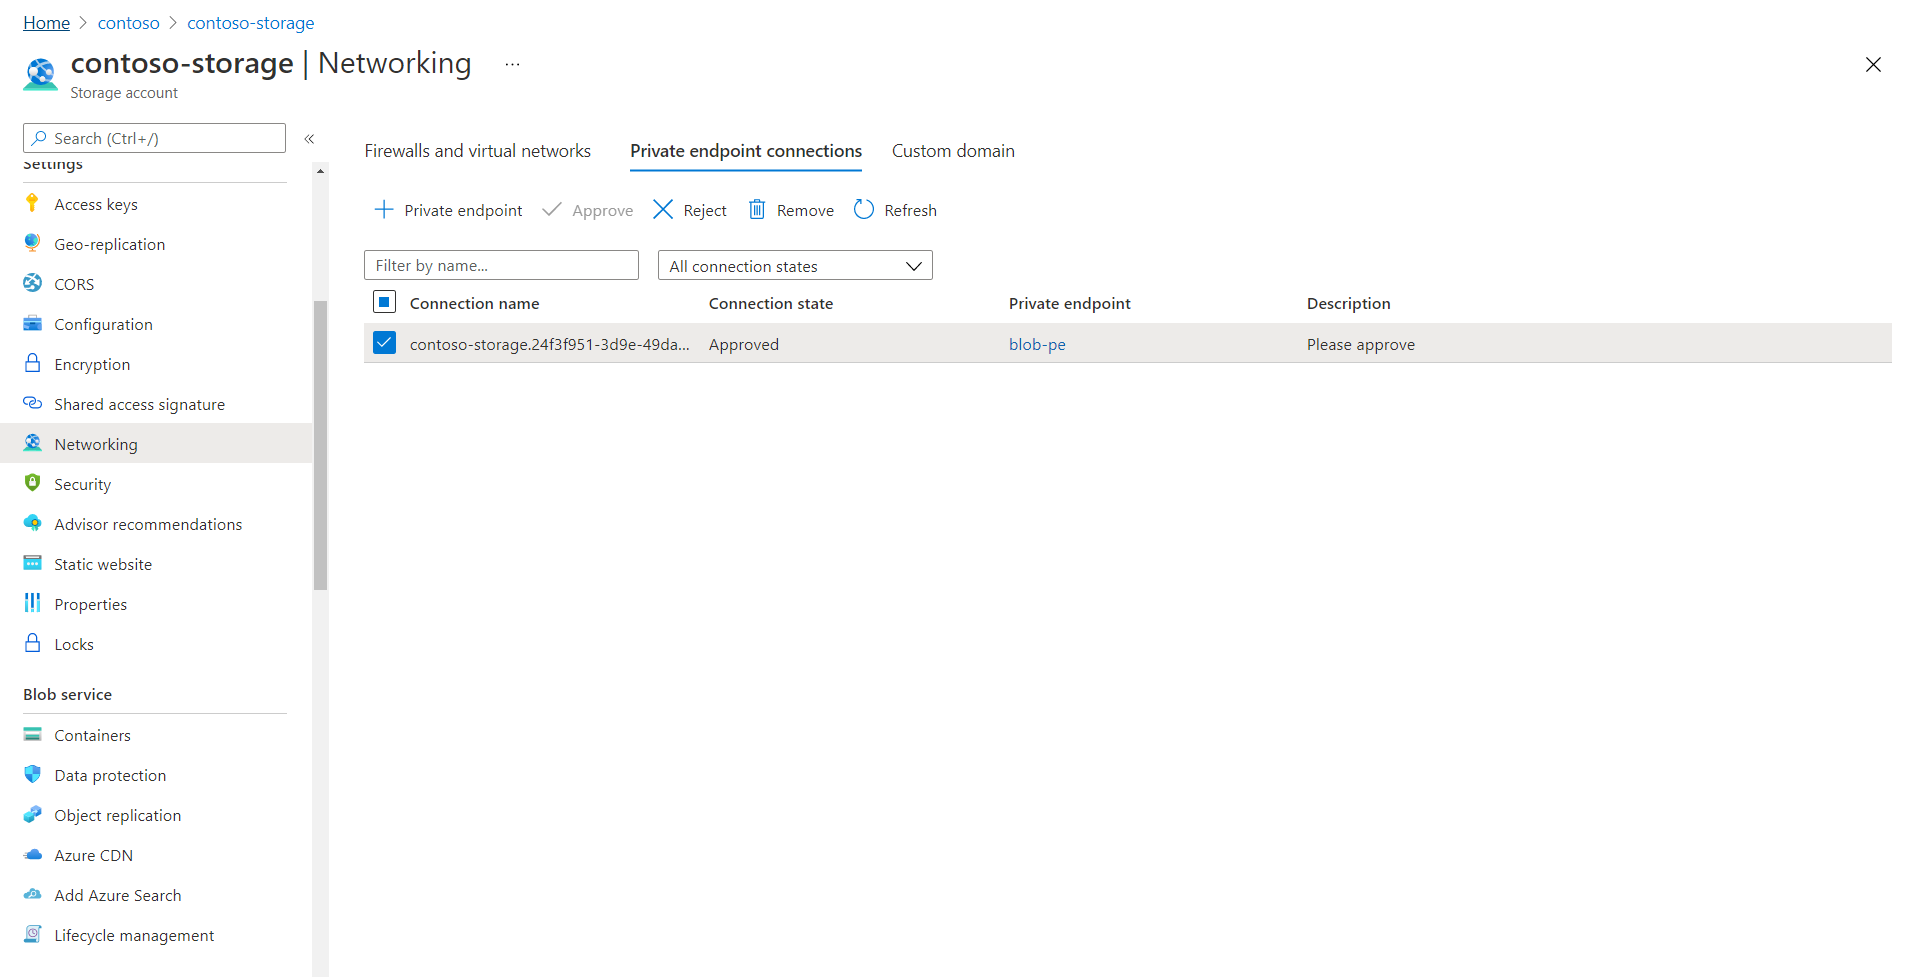 Screenshot of the Azure portal, showing an Approved status on the Private endpoint connections pane.